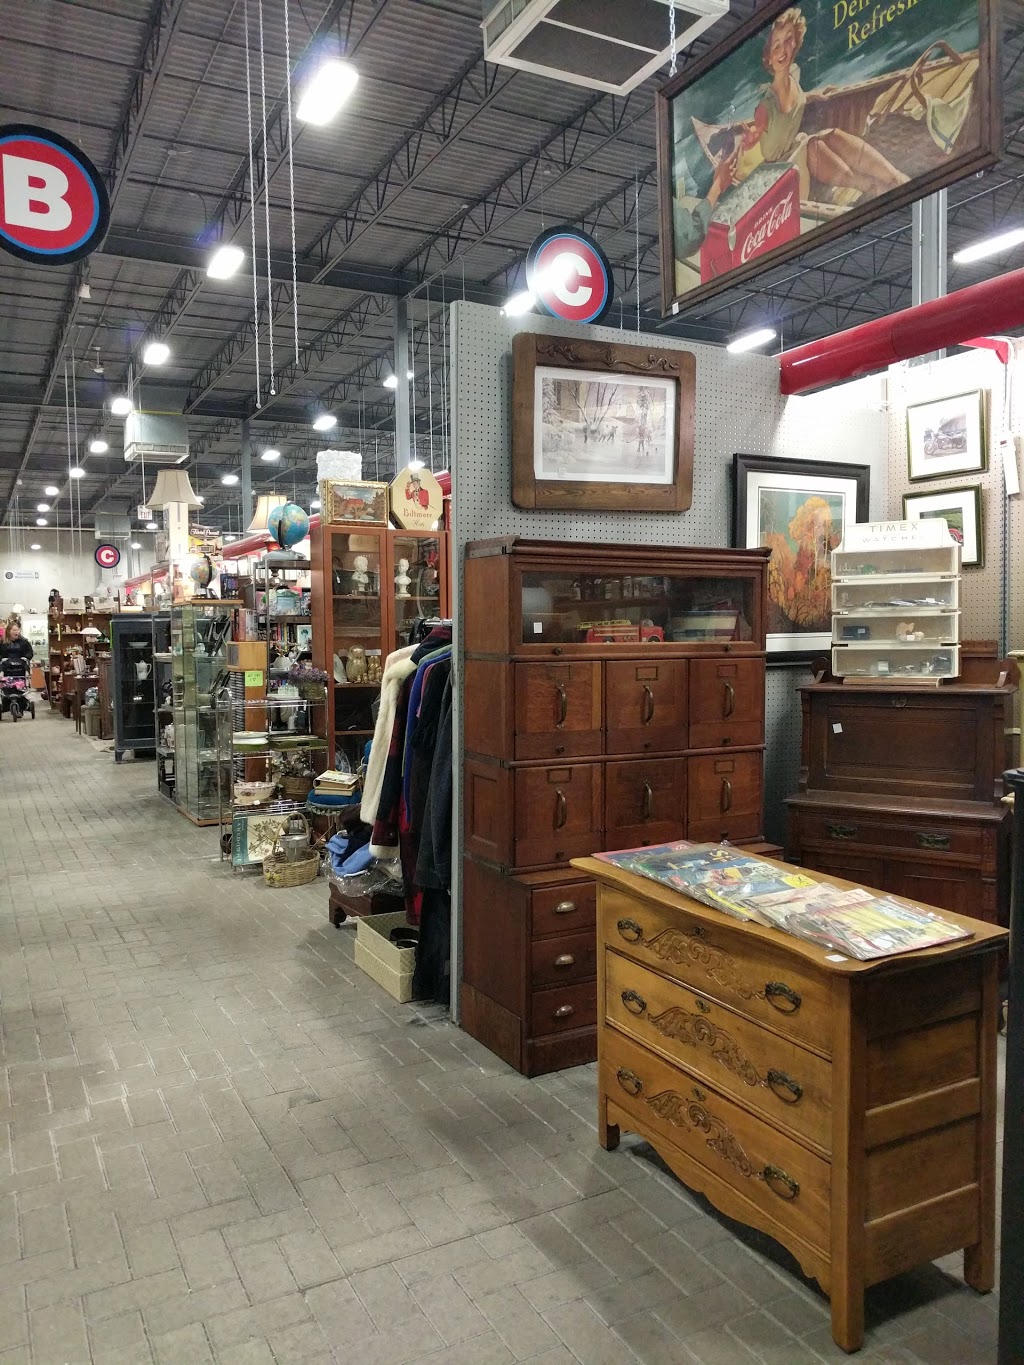 Roadshow Antiques Pickering | 1400 Squires Beach Rd, Pickering, ON L1W 3S3, Canada | Phone: (905) 427-7902